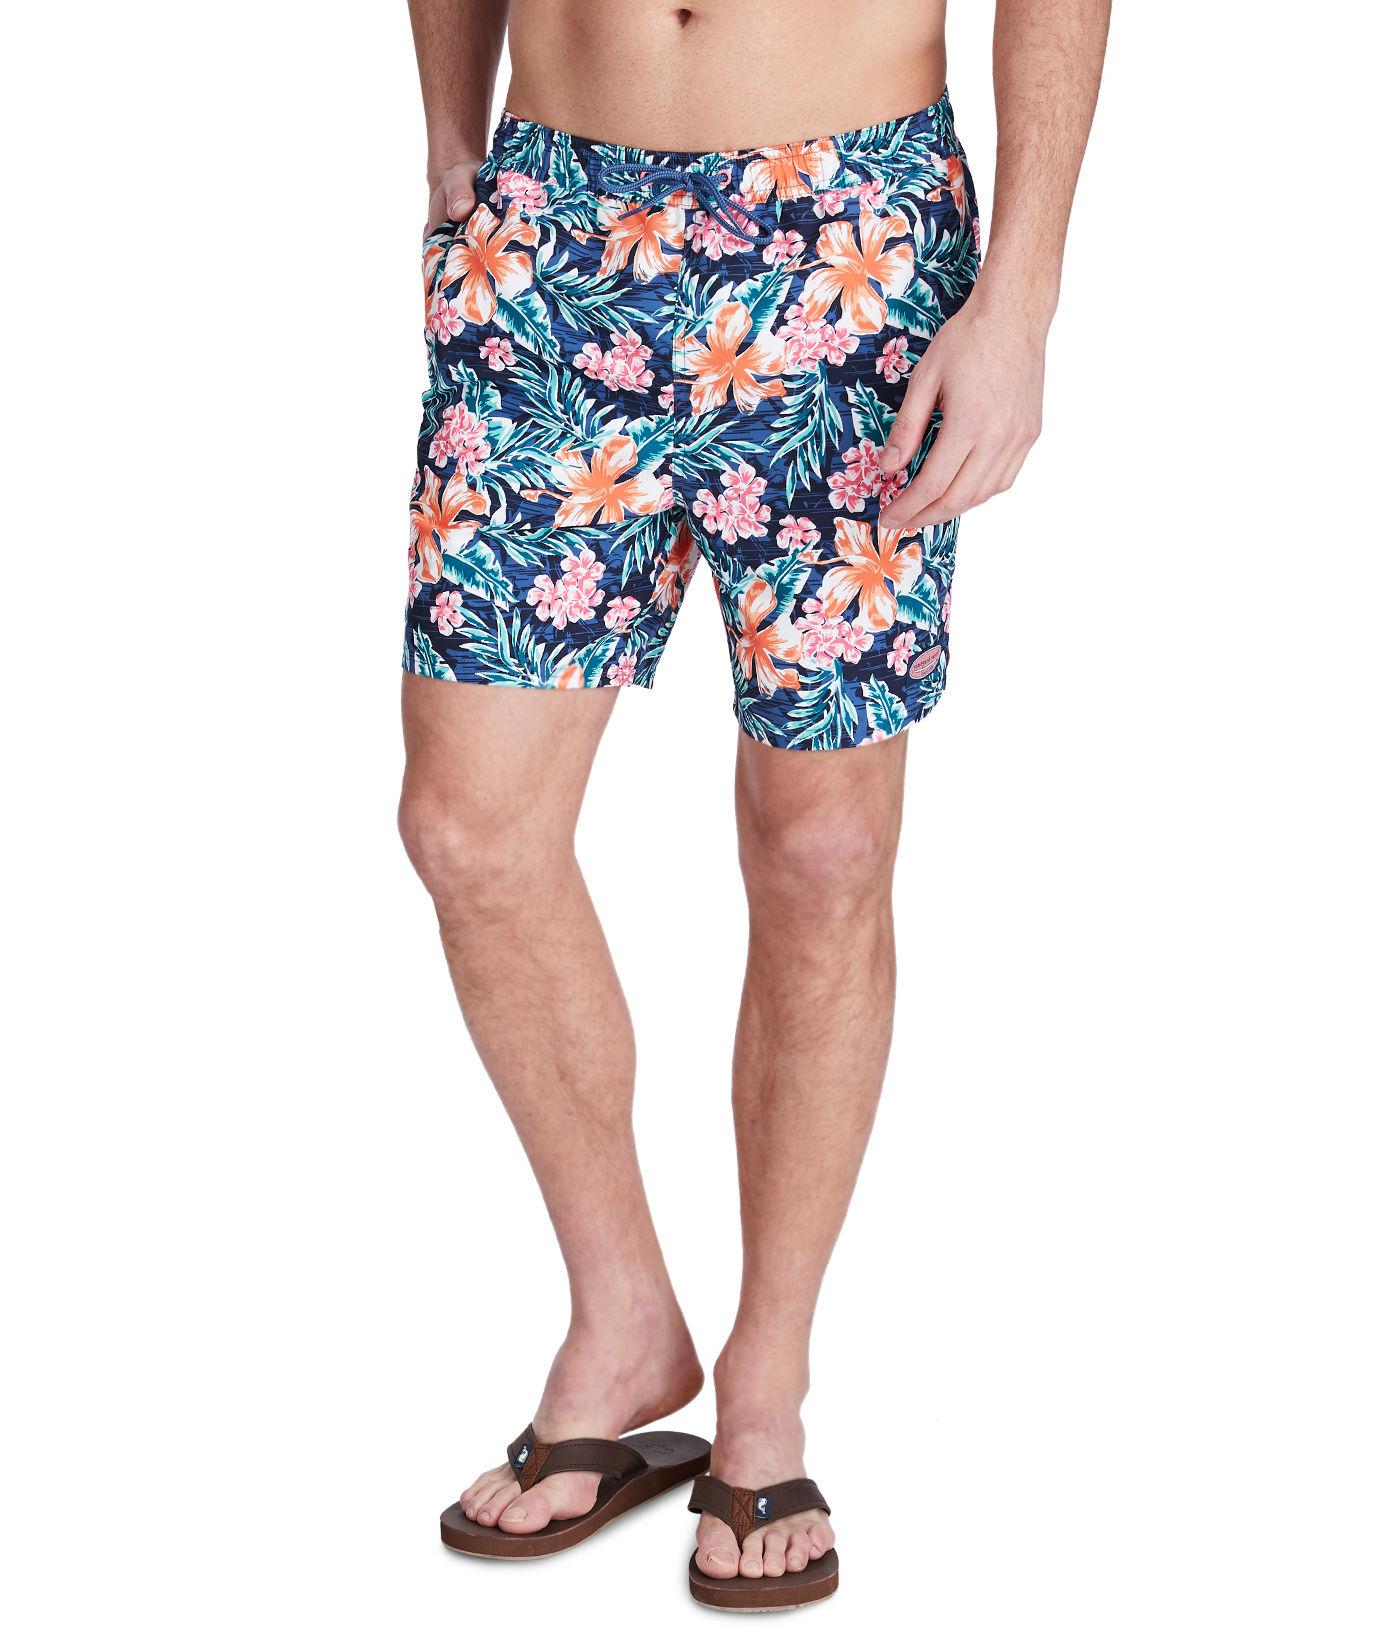 Vineyard Vines Synthetic Guana Floral Chappy Trunks / Swimsuit in Blue for Men - Lyst